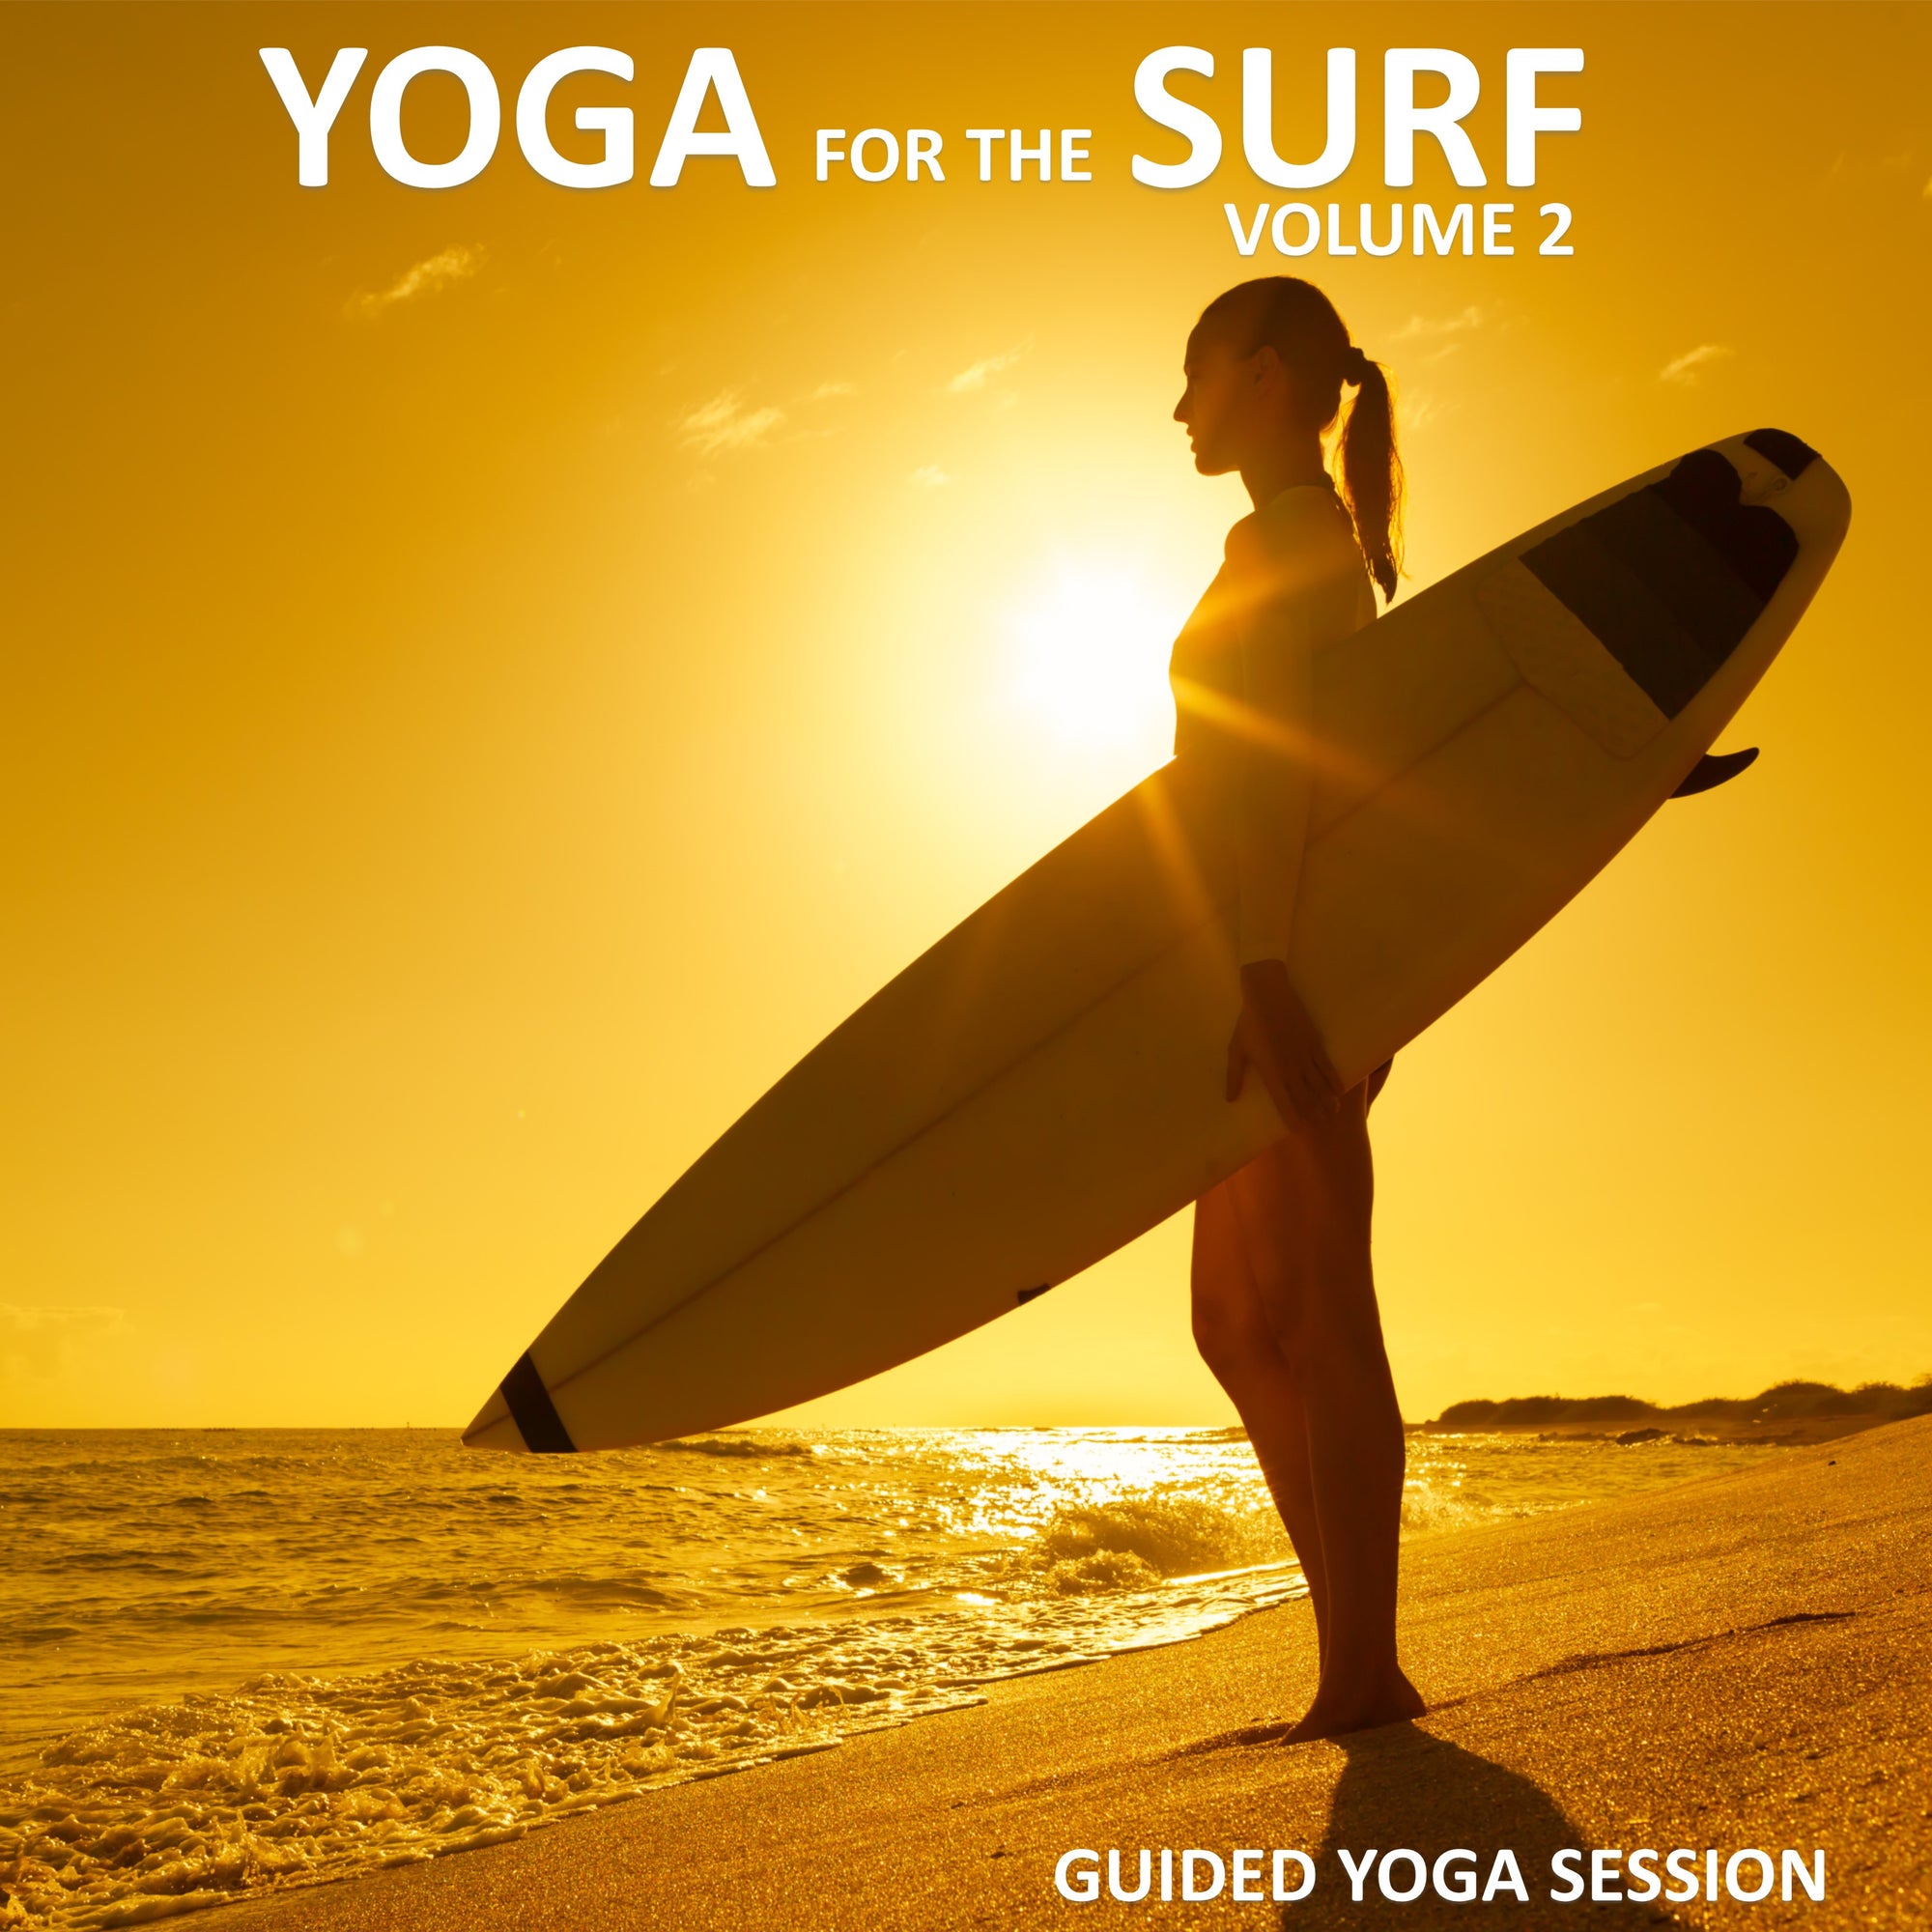 Yoga for the Surf Vol 2